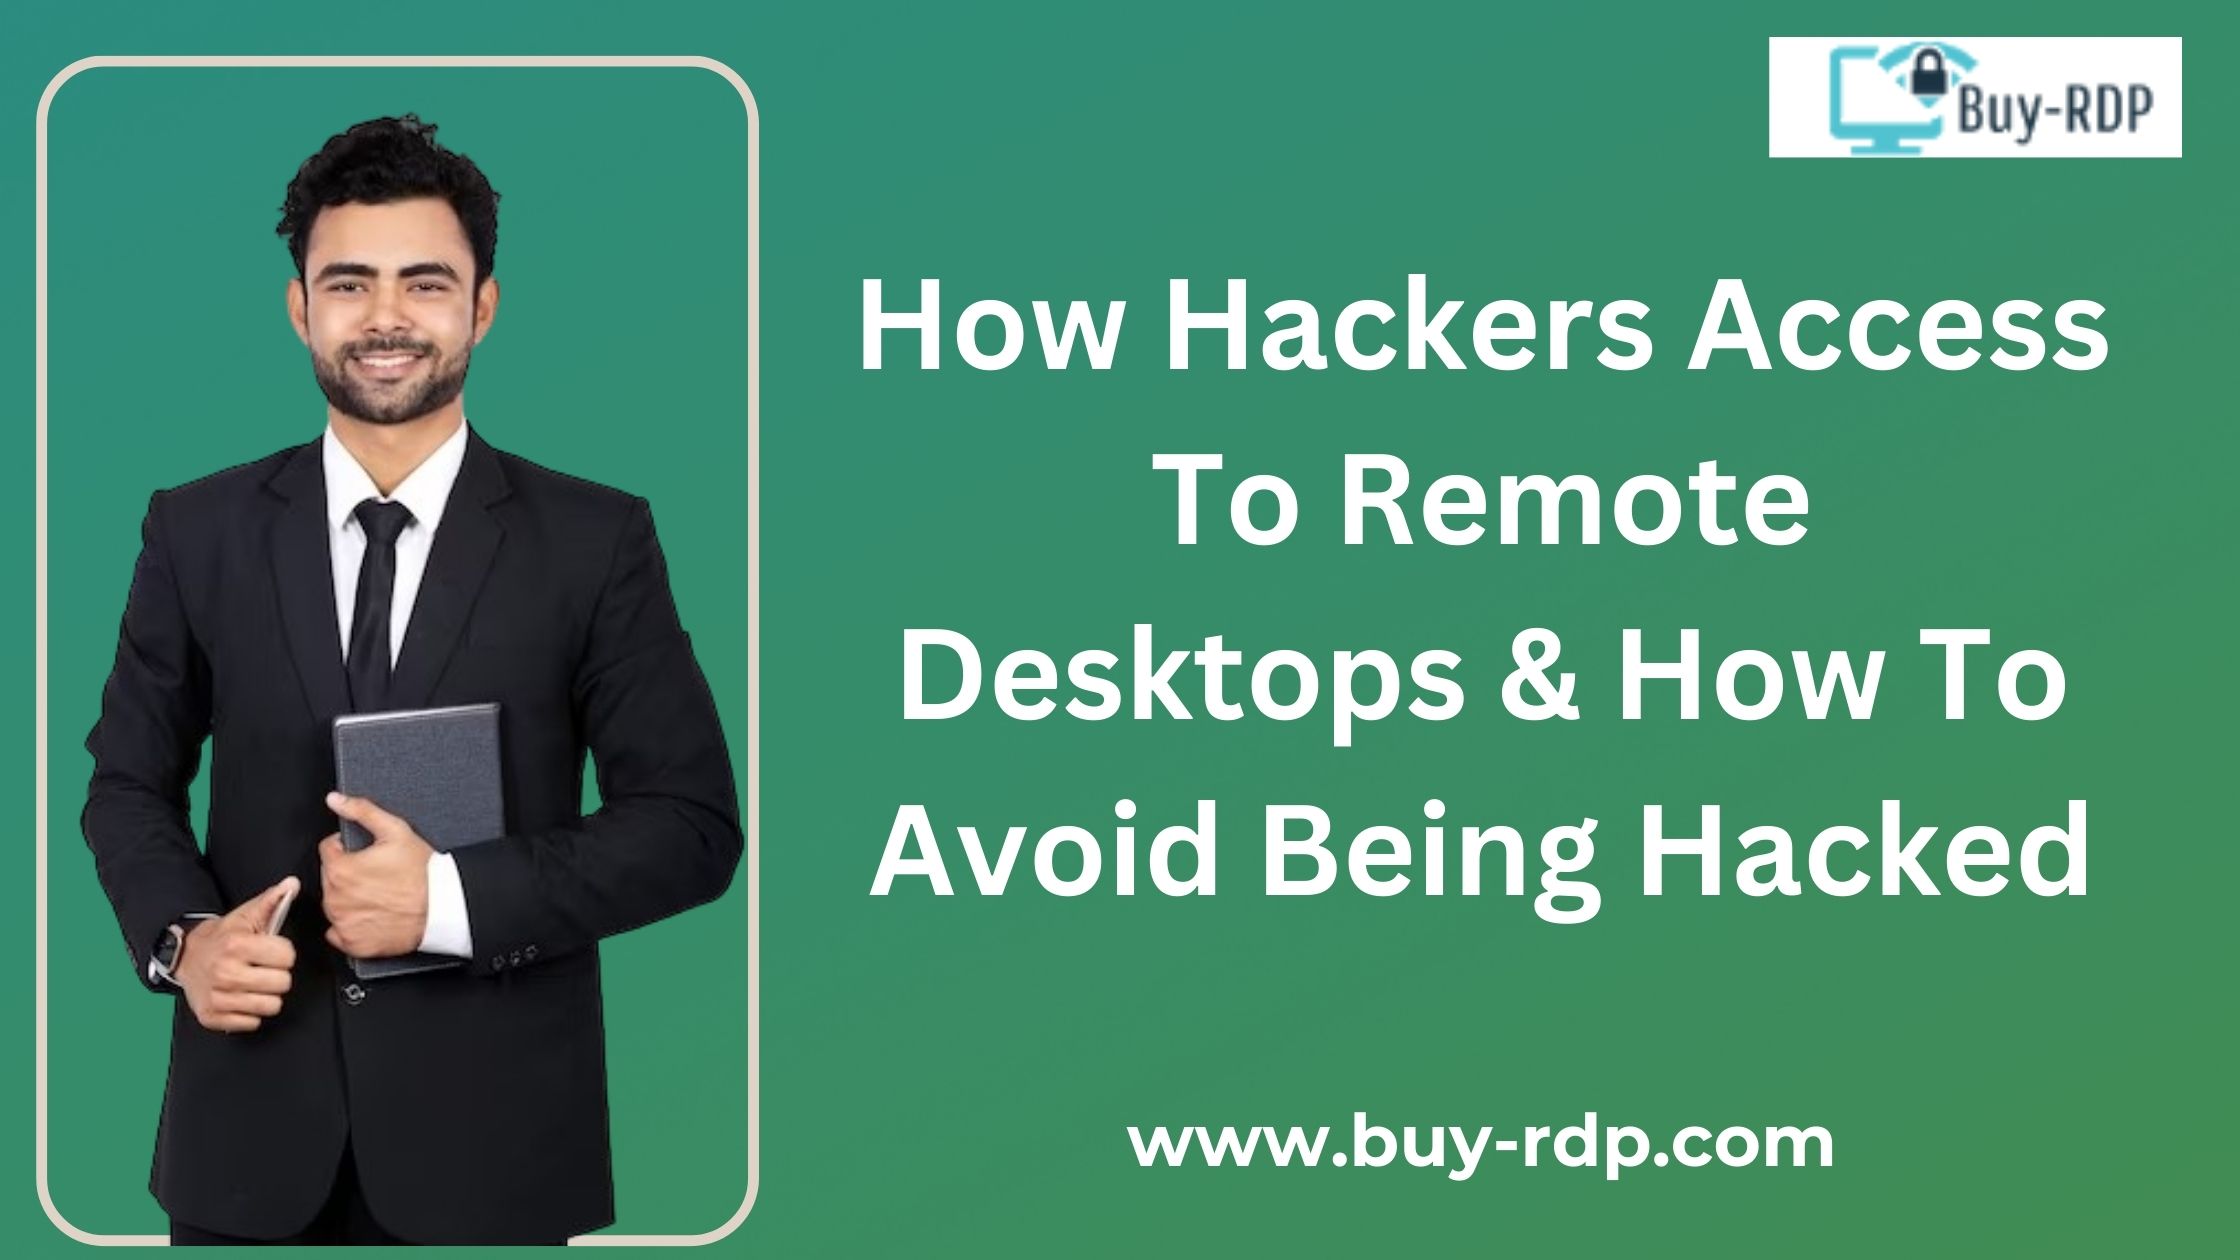 How Hackers Access To Remote Desktops & How To Avoid Being Hacked